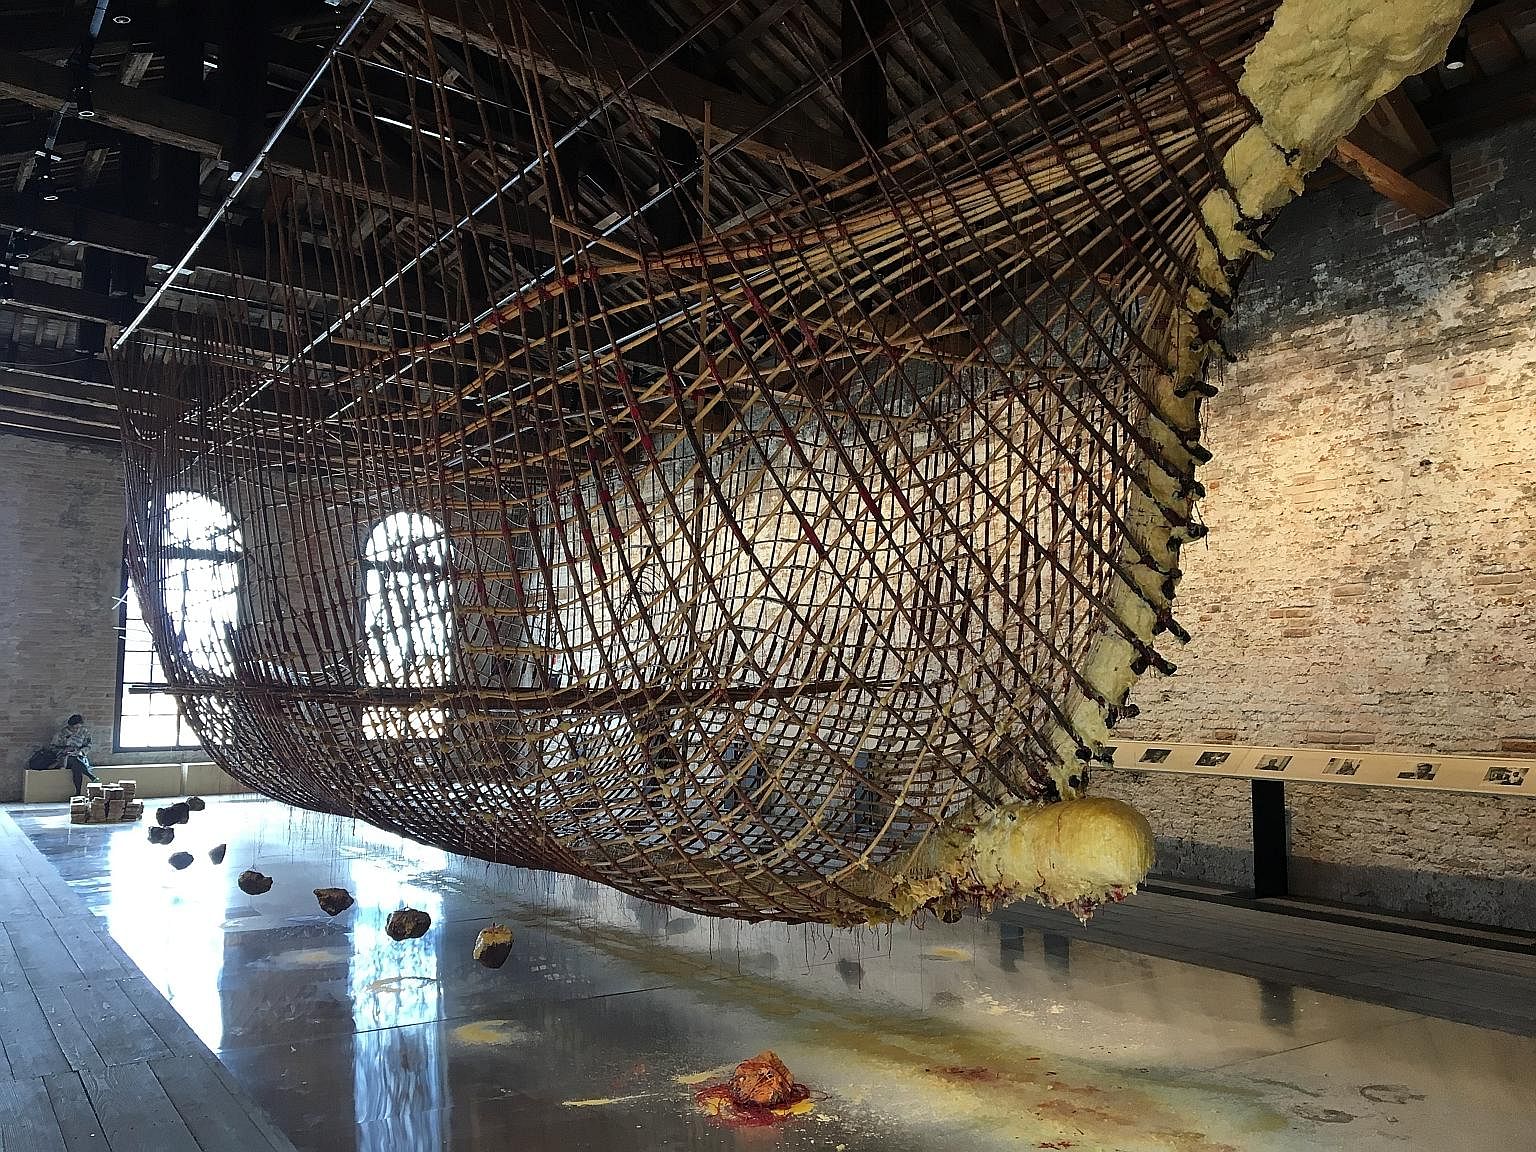 Artist Zai Kuning's suspended ship - the hull of a 12m-long seagoing craft made from rattan and bound together with beeswax and red cord - evokes Singapore's trading roots and the shared Melayu-Riau heritage of its people, says the writer.